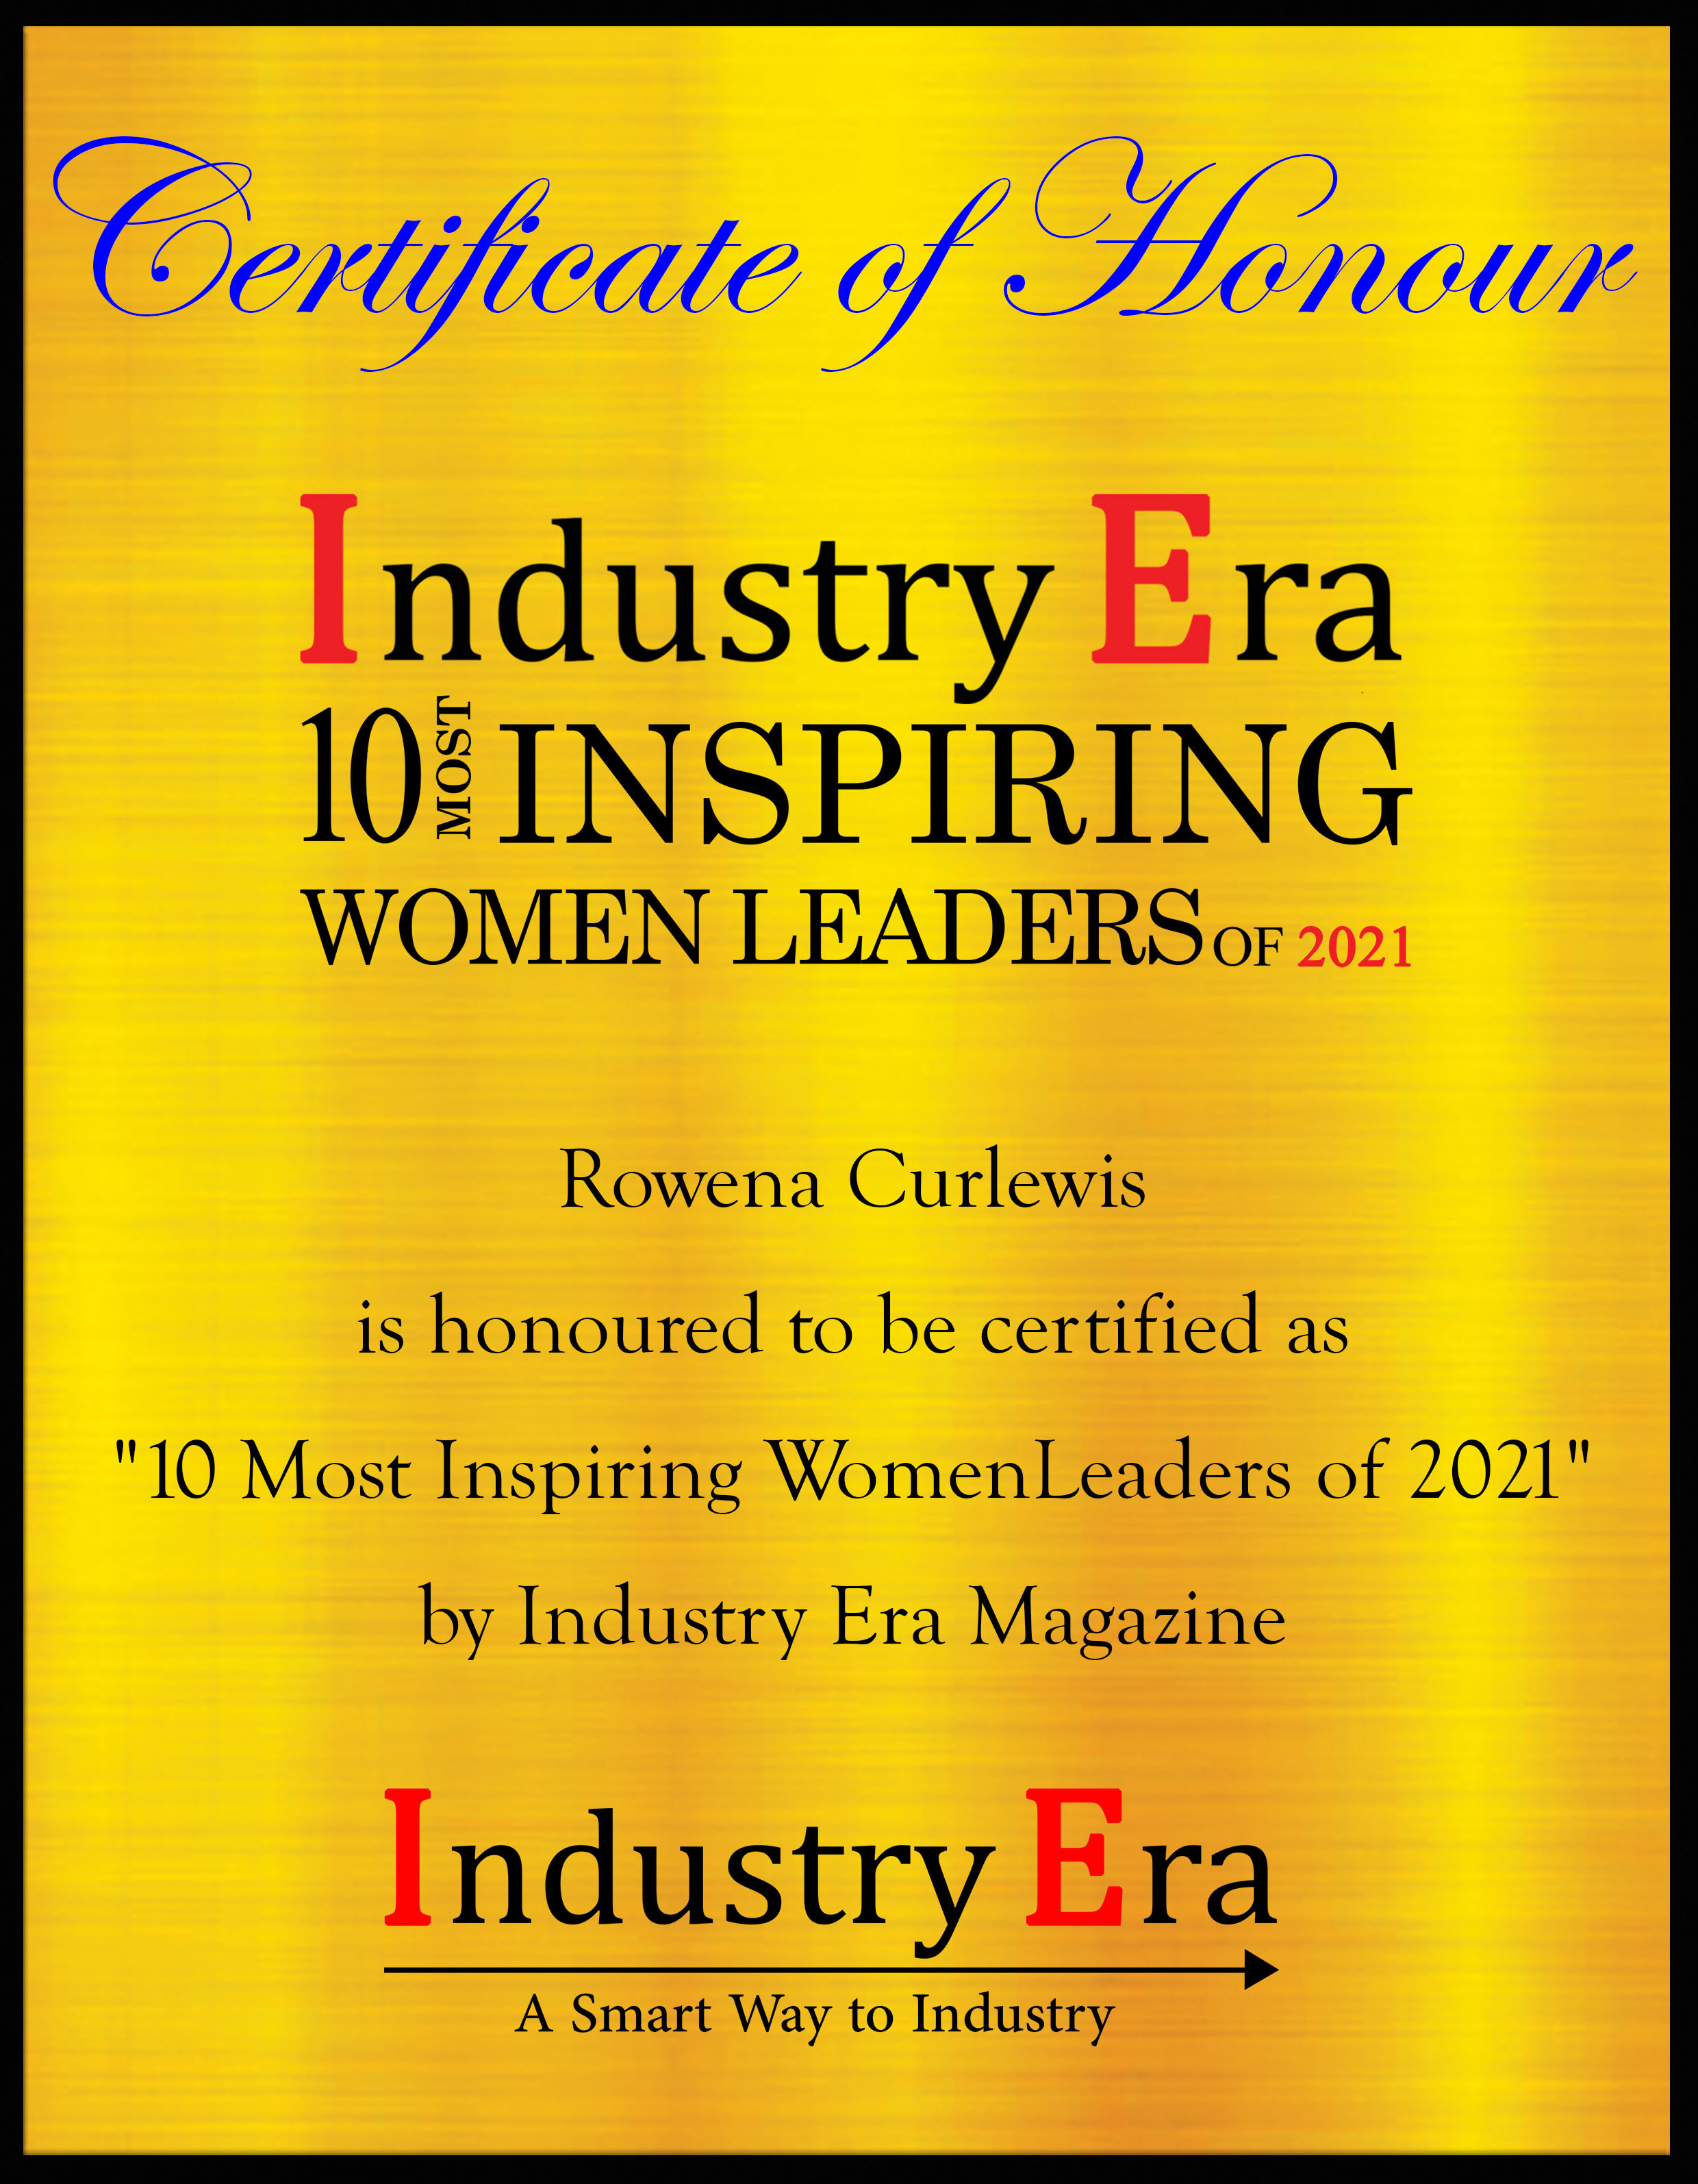 Rowena Curlewis CEO & co-founder of Denomination, Most Inspiring WomenLeaders of 2021